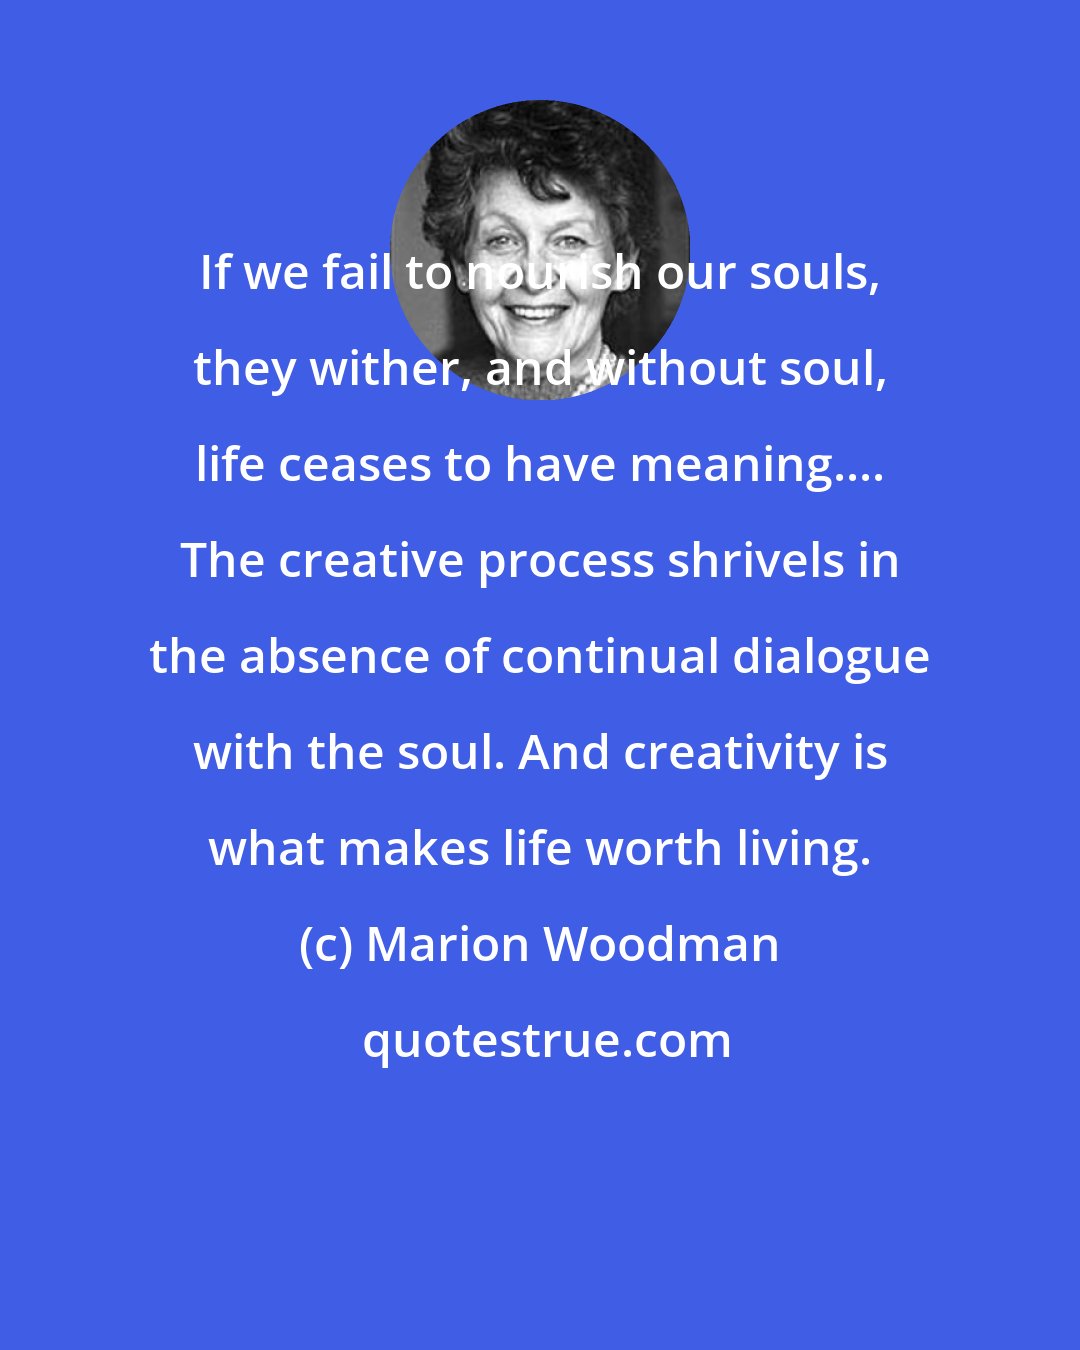 Marion Woodman: If we fail to nourish our souls, they wither, and without soul, life ceases to have meaning.... The creative process shrivels in the absence of continual dialogue with the soul. And creativity is what makes life worth living.